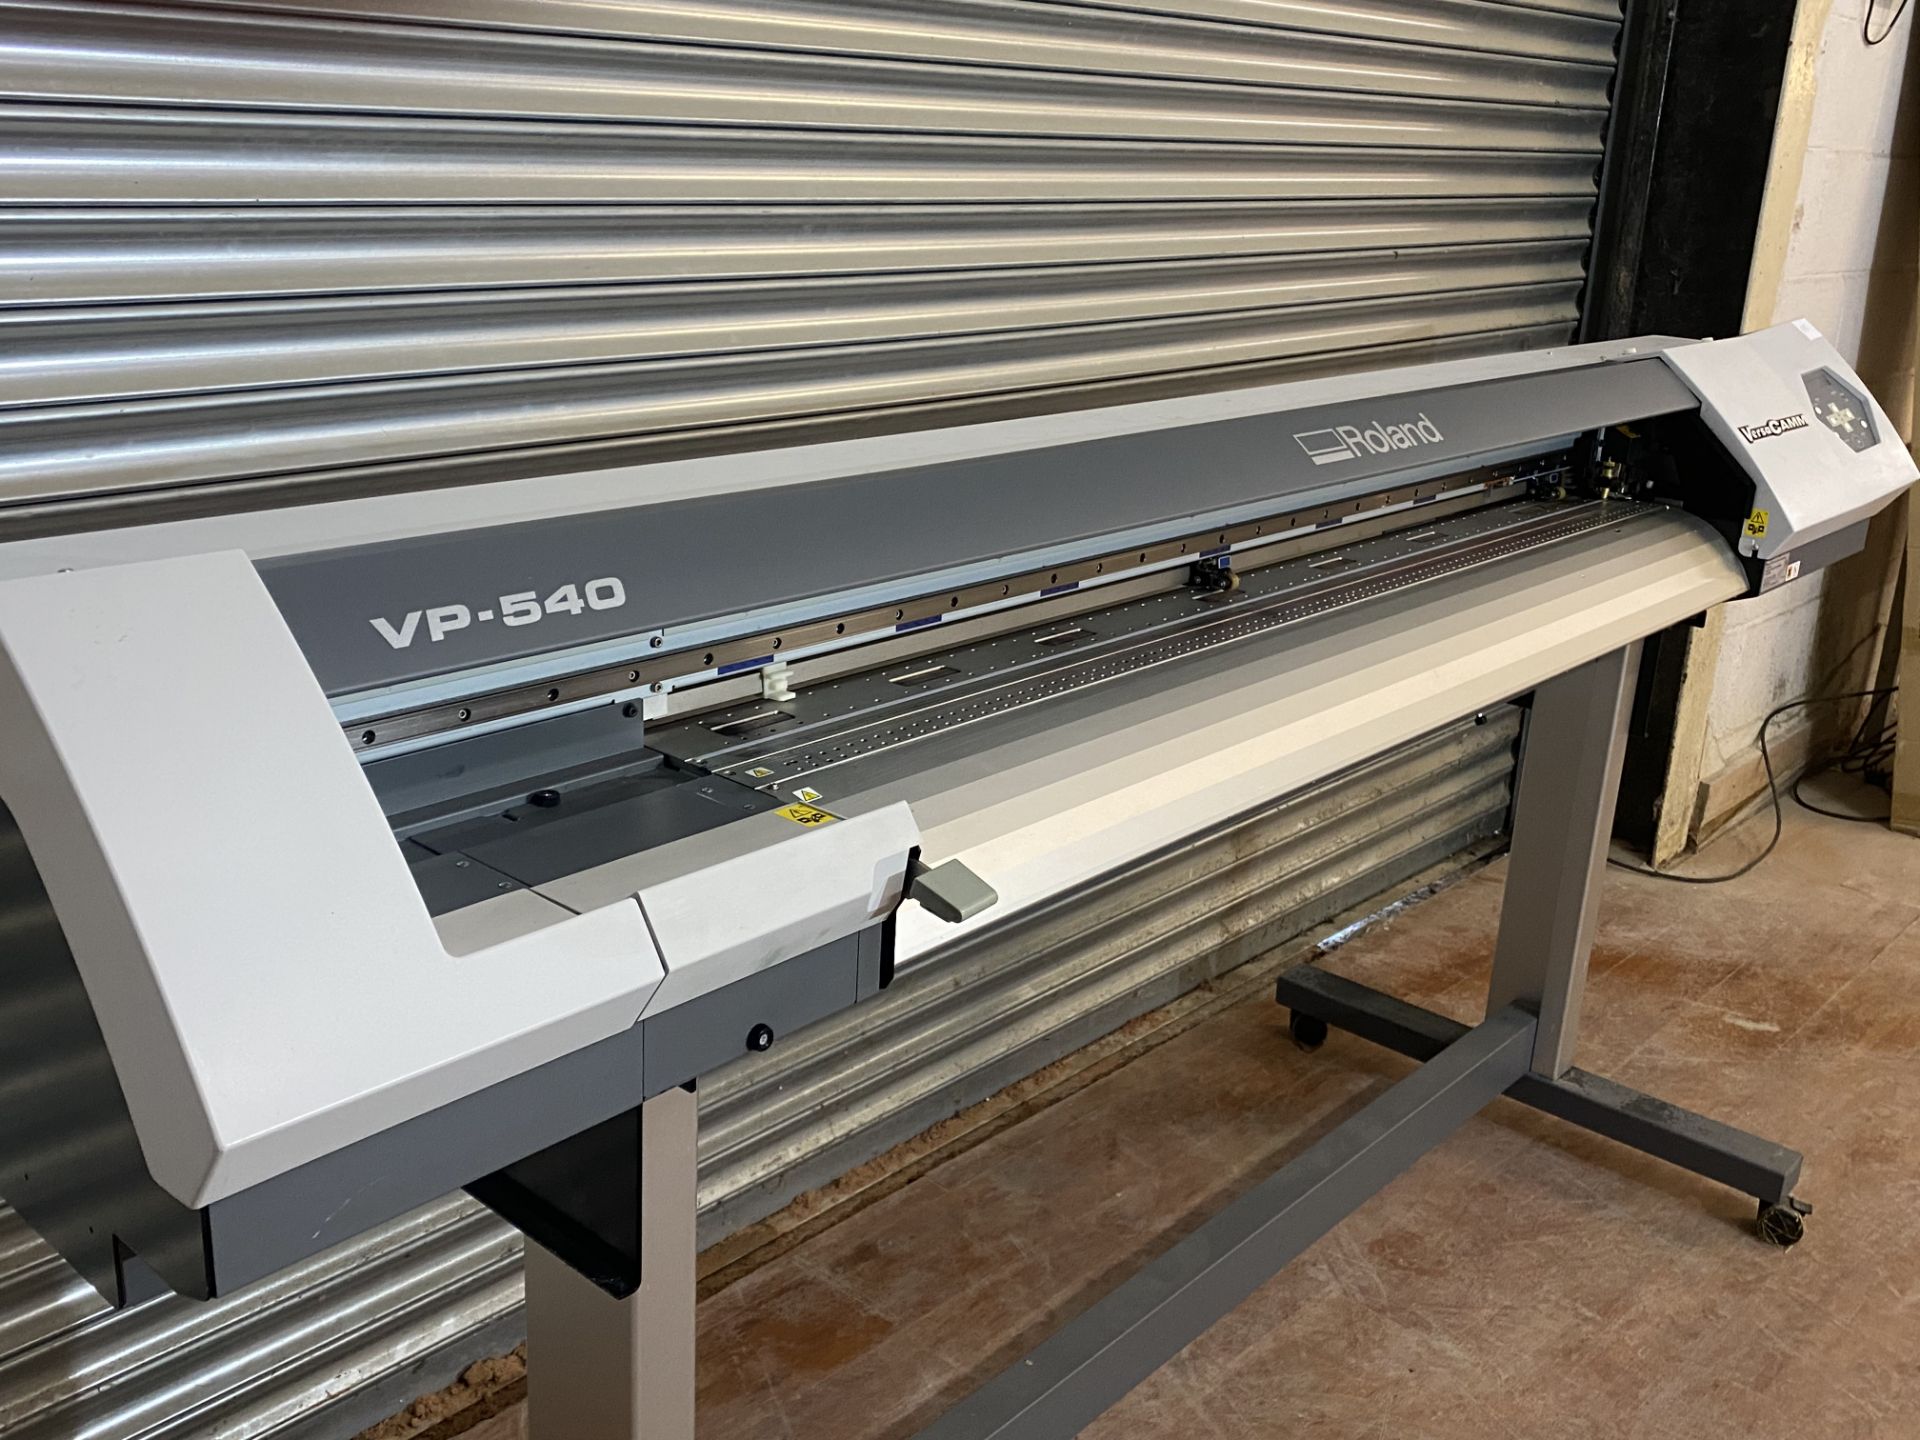 (R5) ROLAND VP540 ECO SOLVENT PRINT AND CUT LARGE FORMAT PRINTER - Image 3 of 3